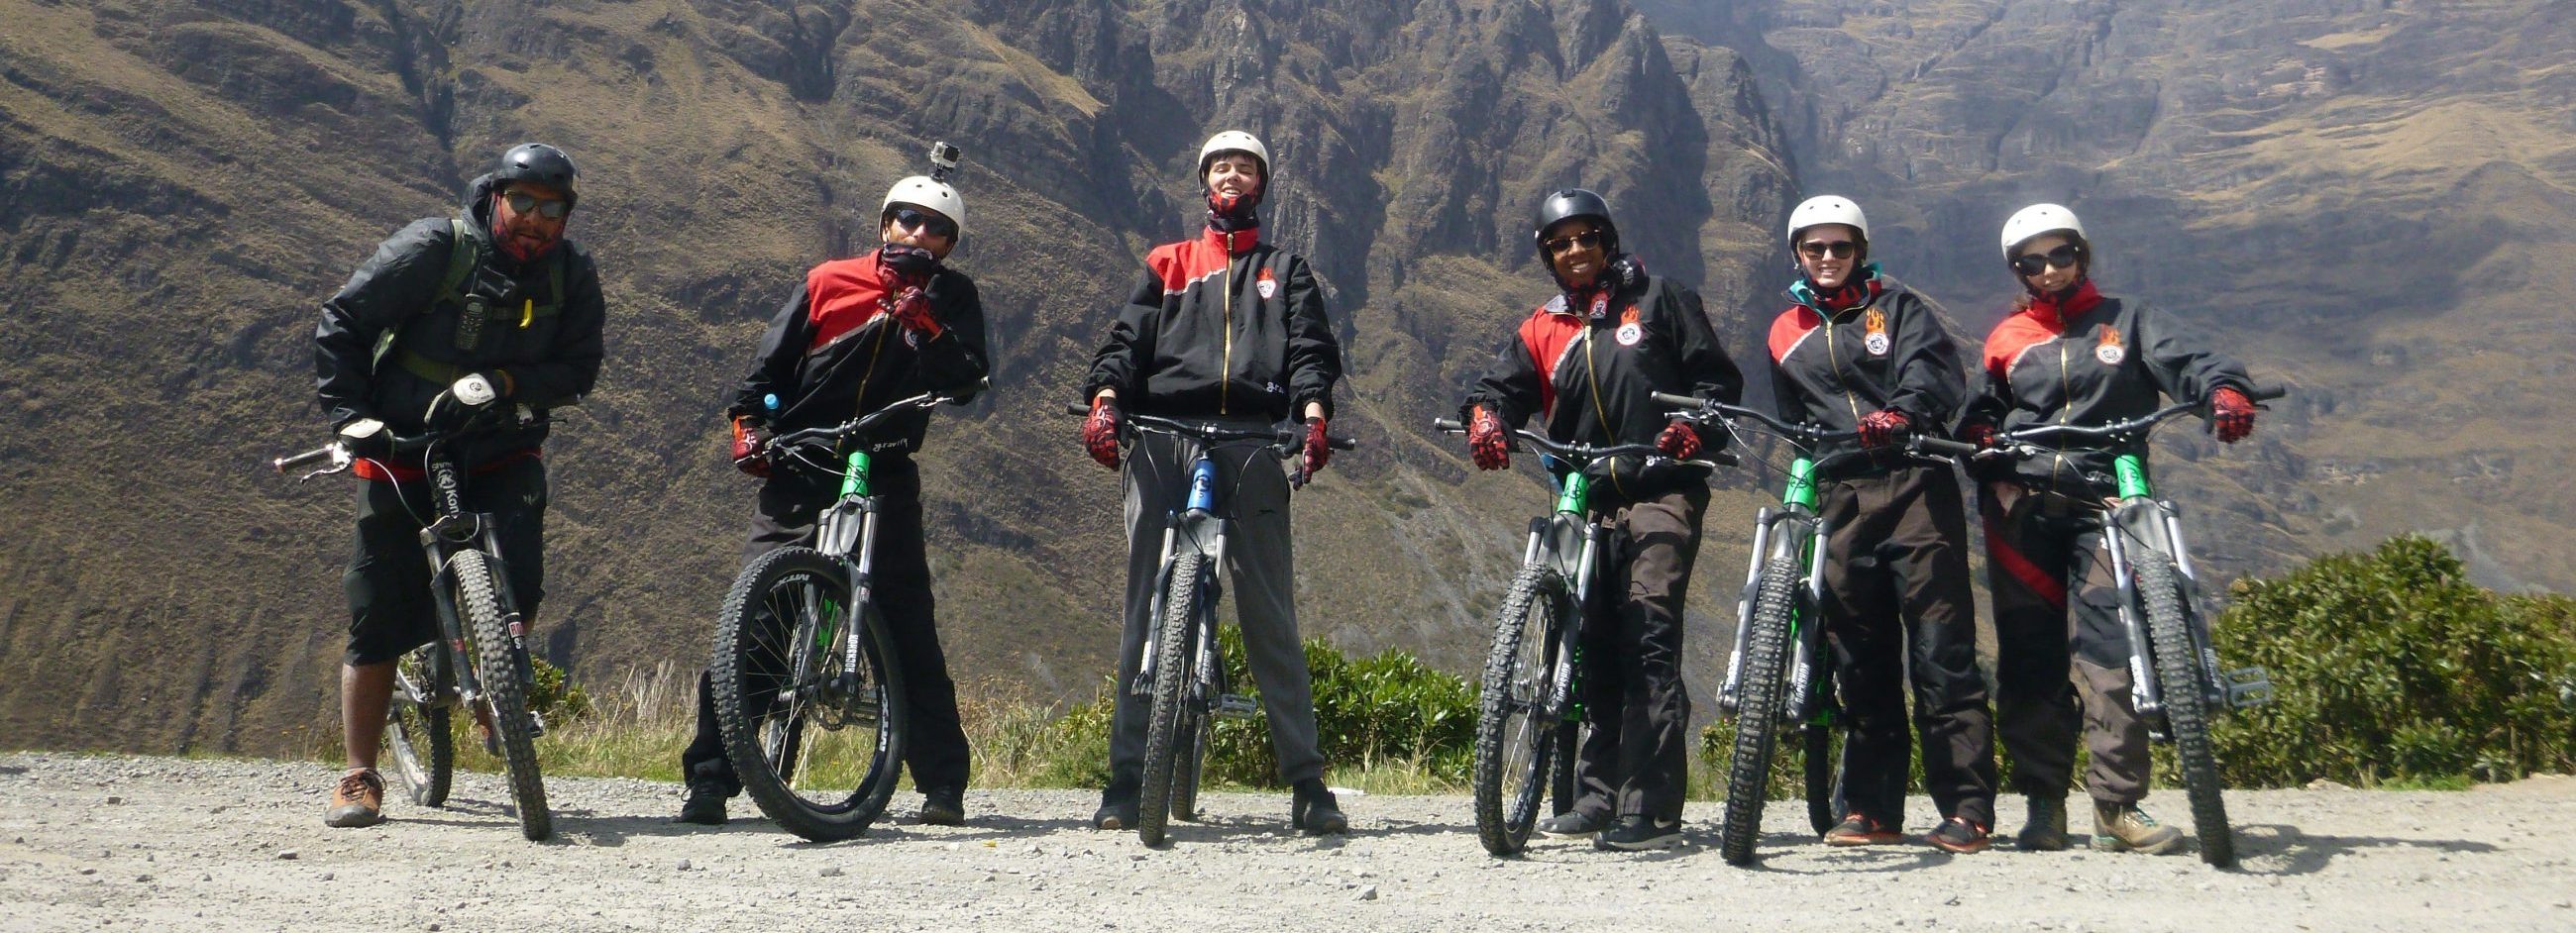 Bolivia mountain biking- should it be on our top 5 list?